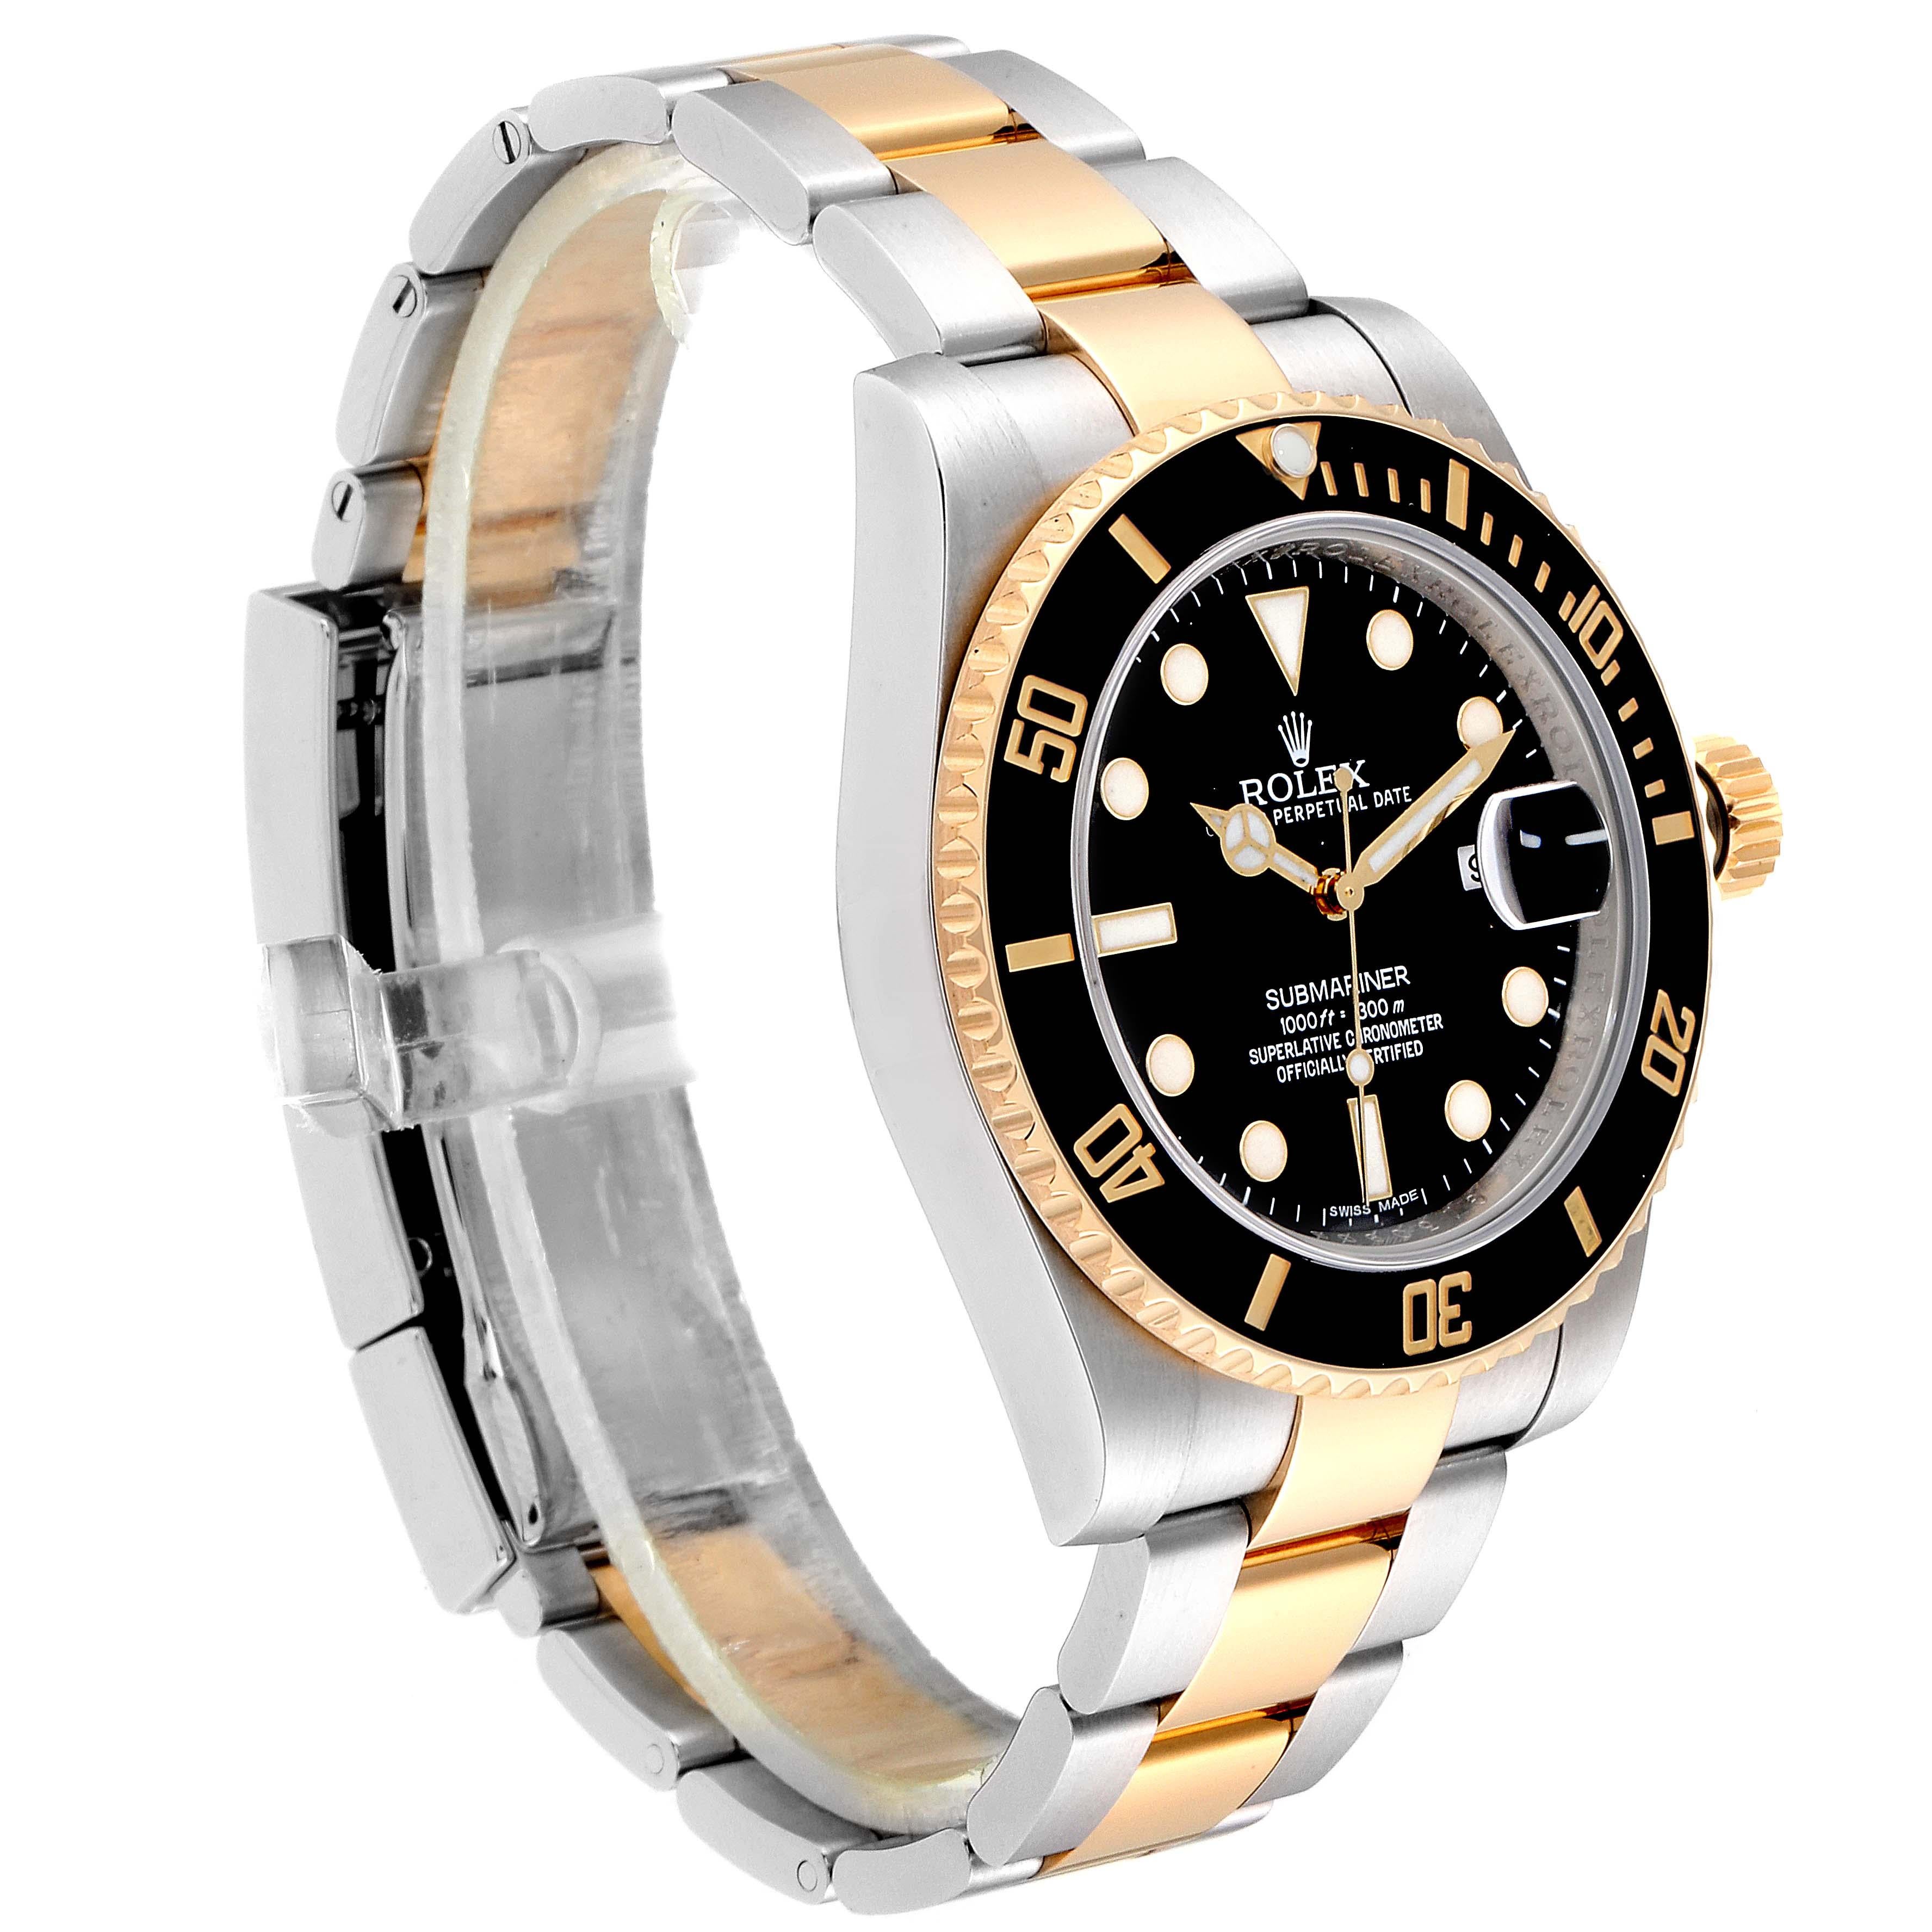 Rolex Submariner Steel Yellow Gold Black Dial Automatic Men's Watch 116613 In Excellent Condition For Sale In Atlanta, GA